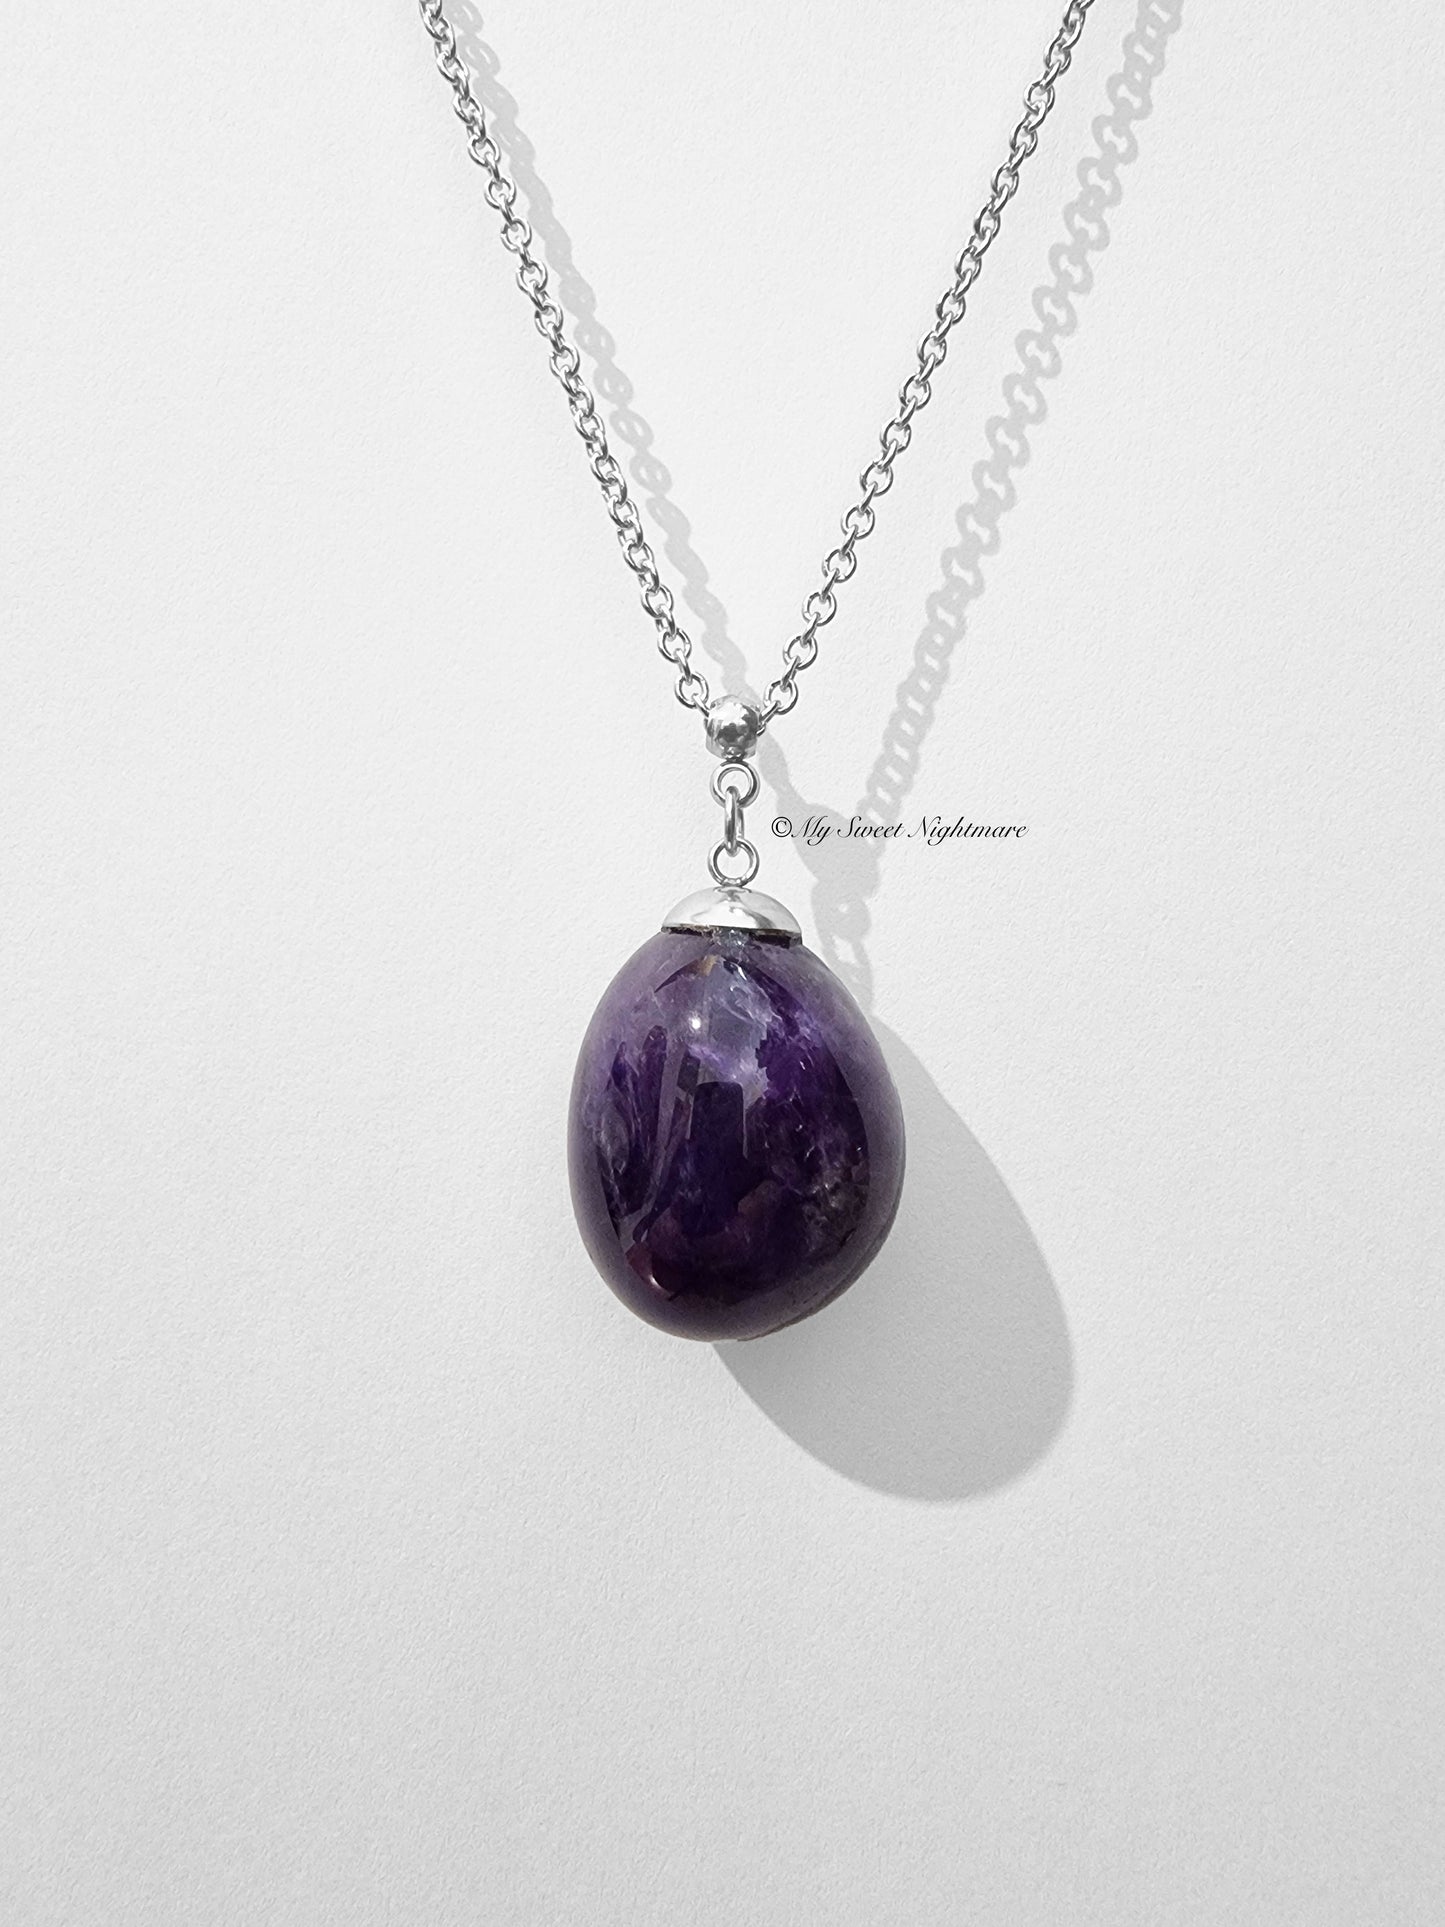 Pendant with natural tumbled Amethyst